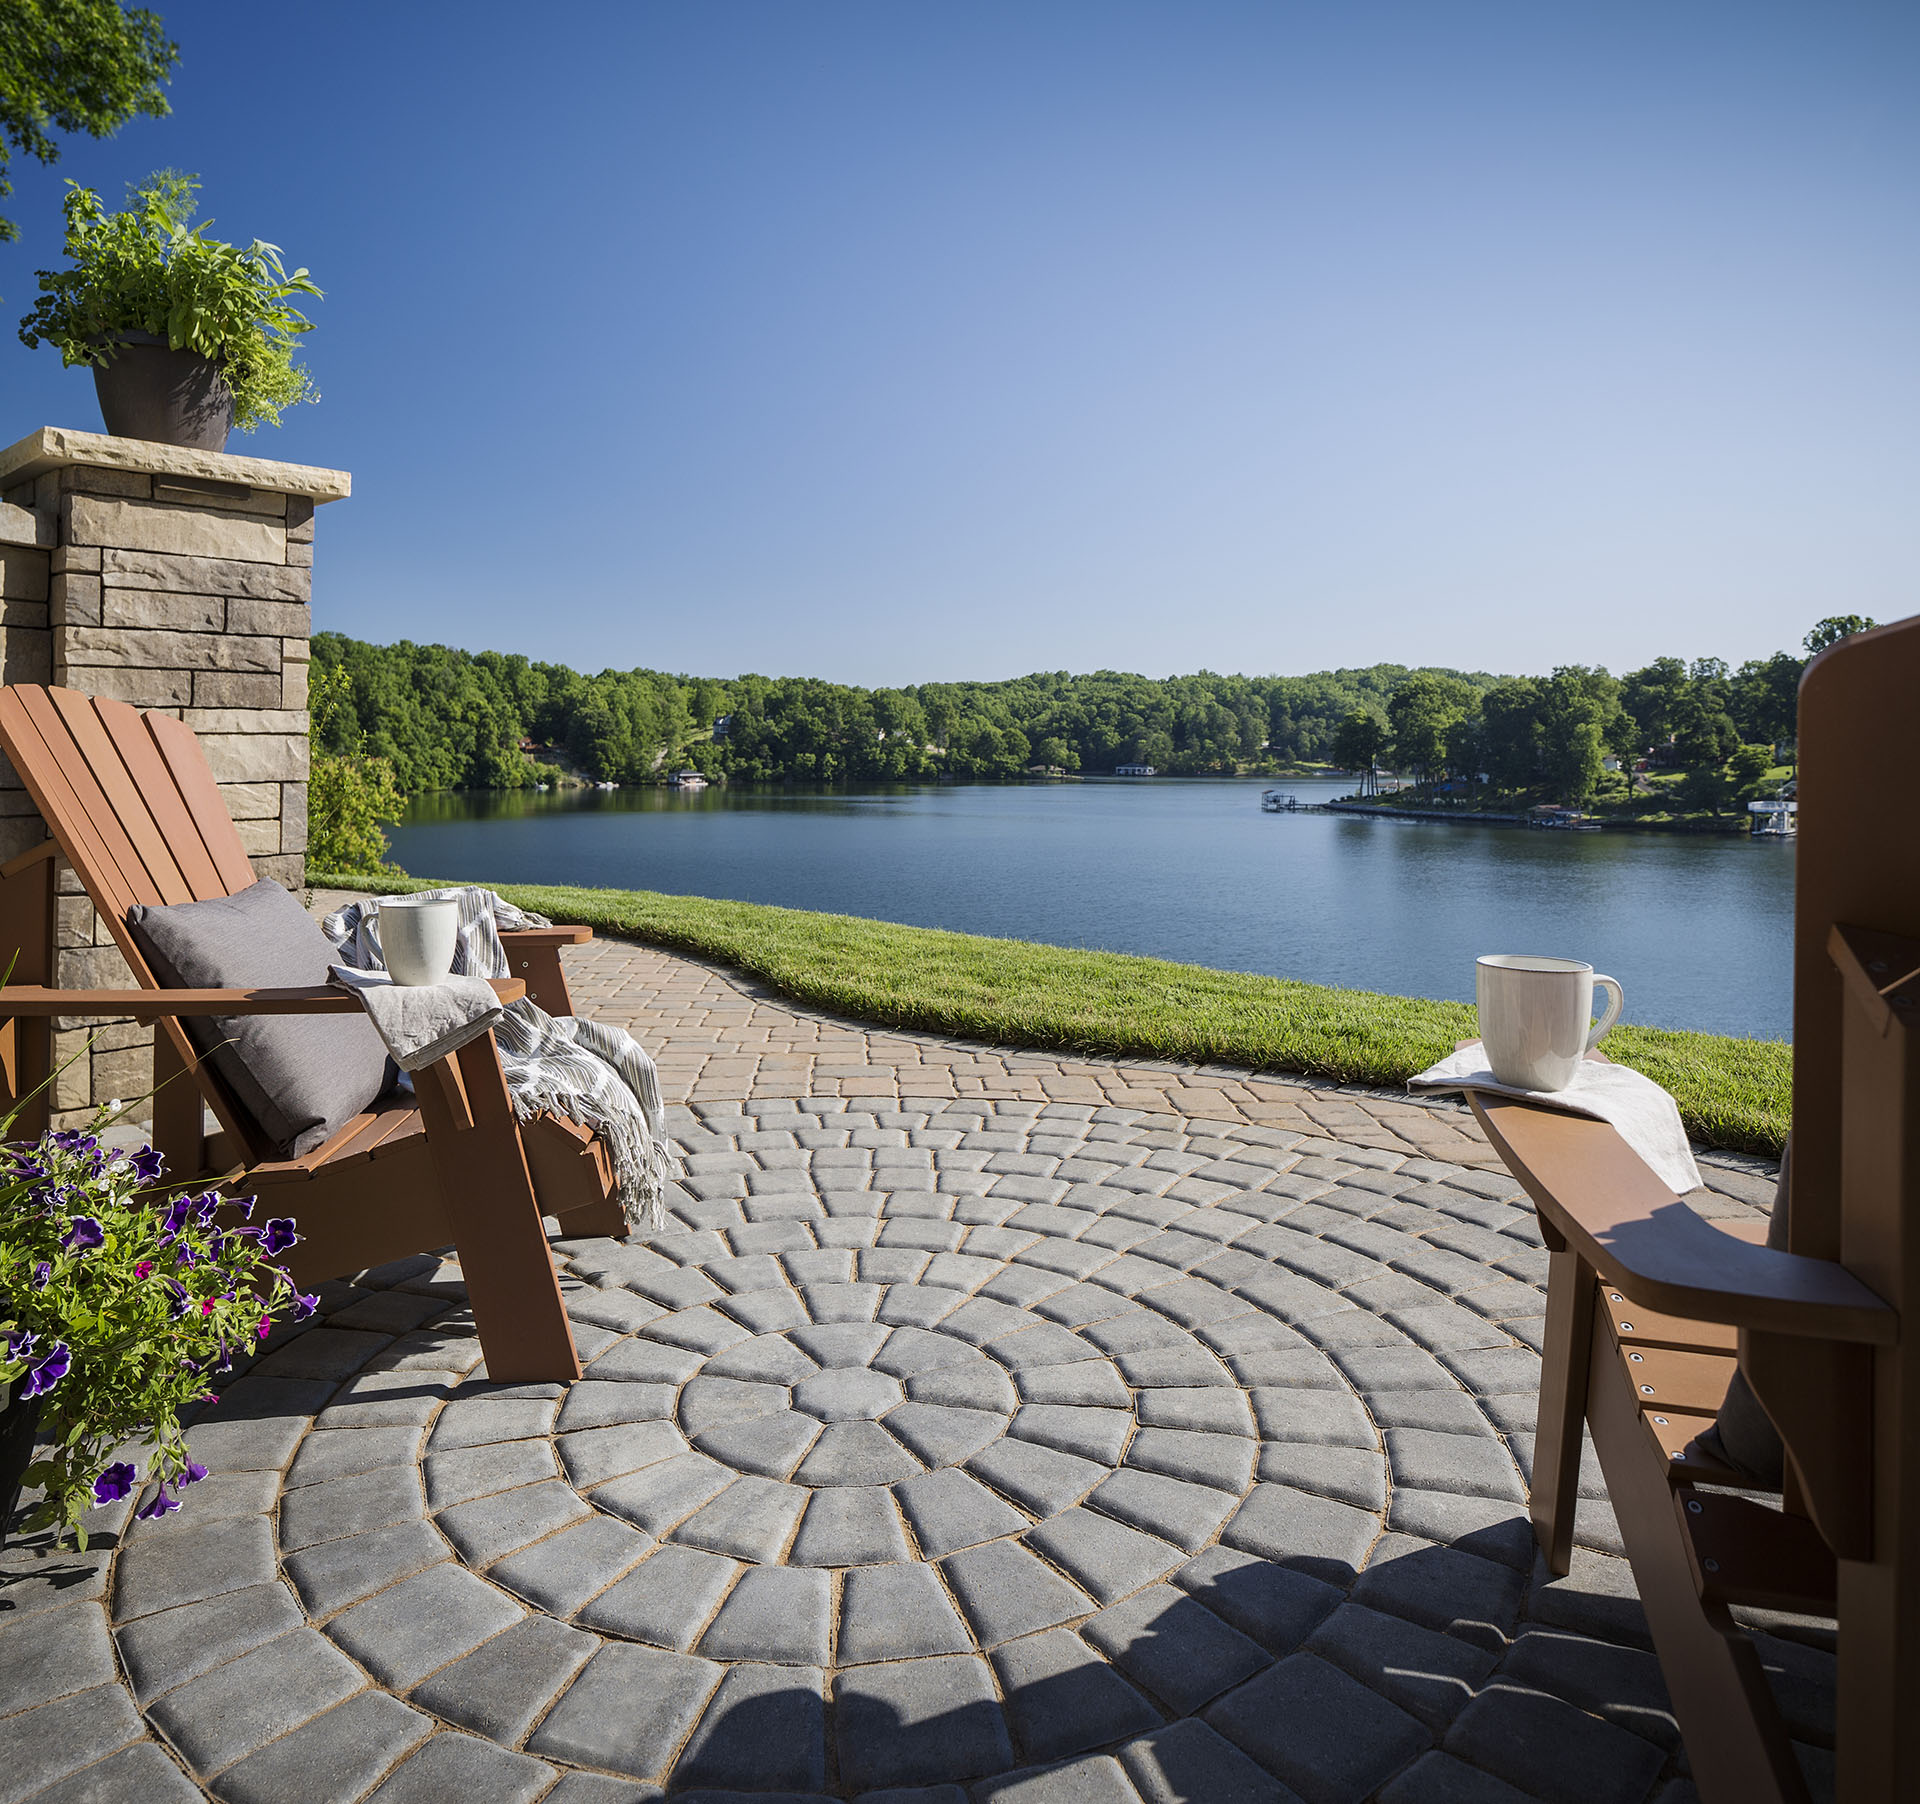 59 Beautiful Paver Patio Ideas for Your Home - Paver IDeas 45